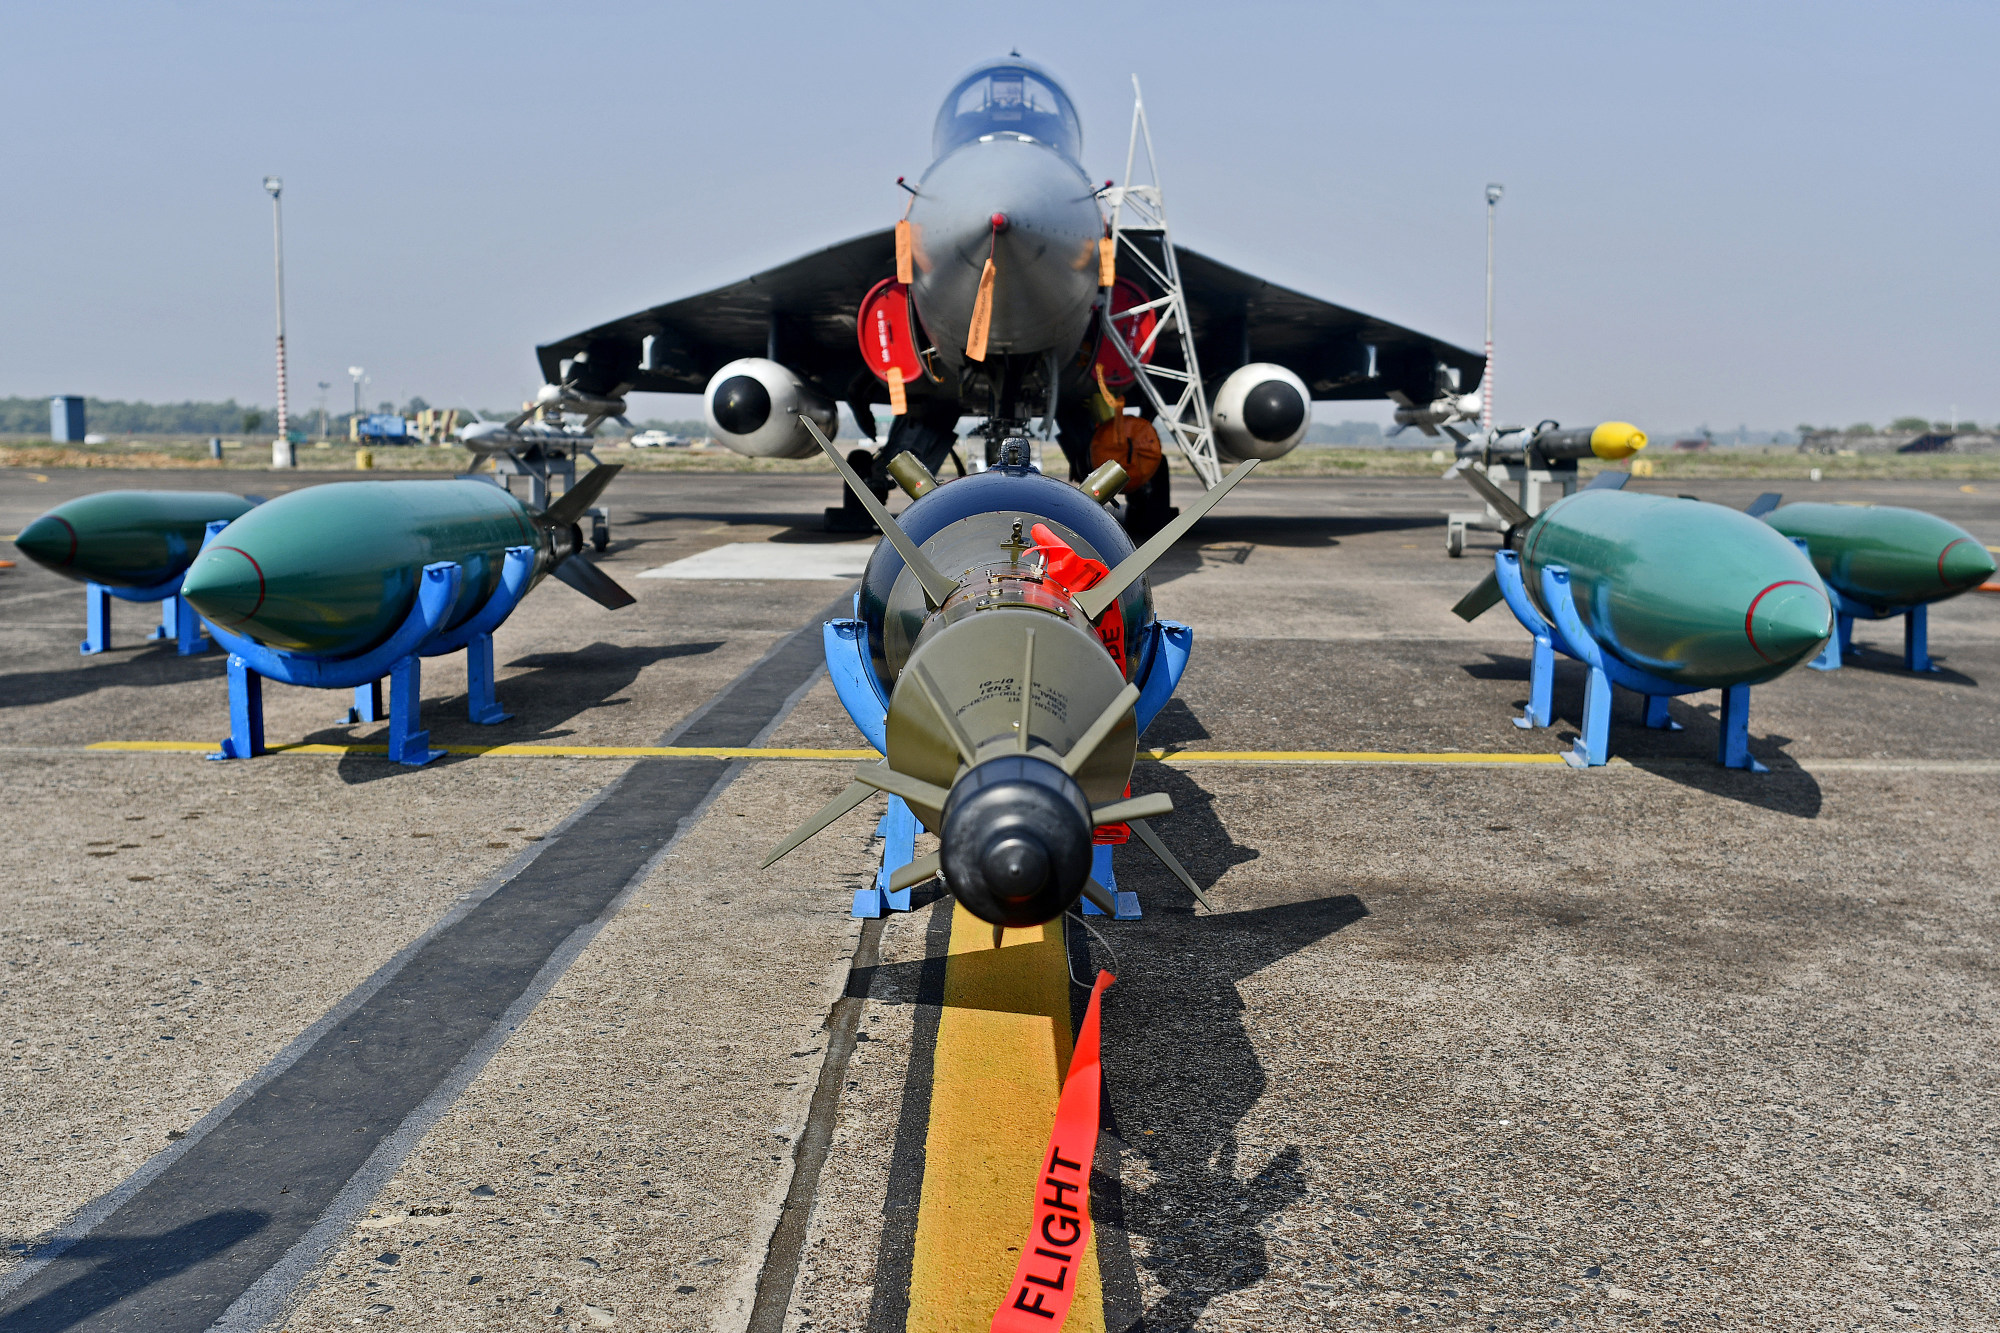 Missiles sit on the tarmac in front of an Indian Air Force&nbsp;Tejas fighter jet, developed by Hindustan Aeronautics Ltd., at the Kalaikunda Air Force Station, West Bengal, India.